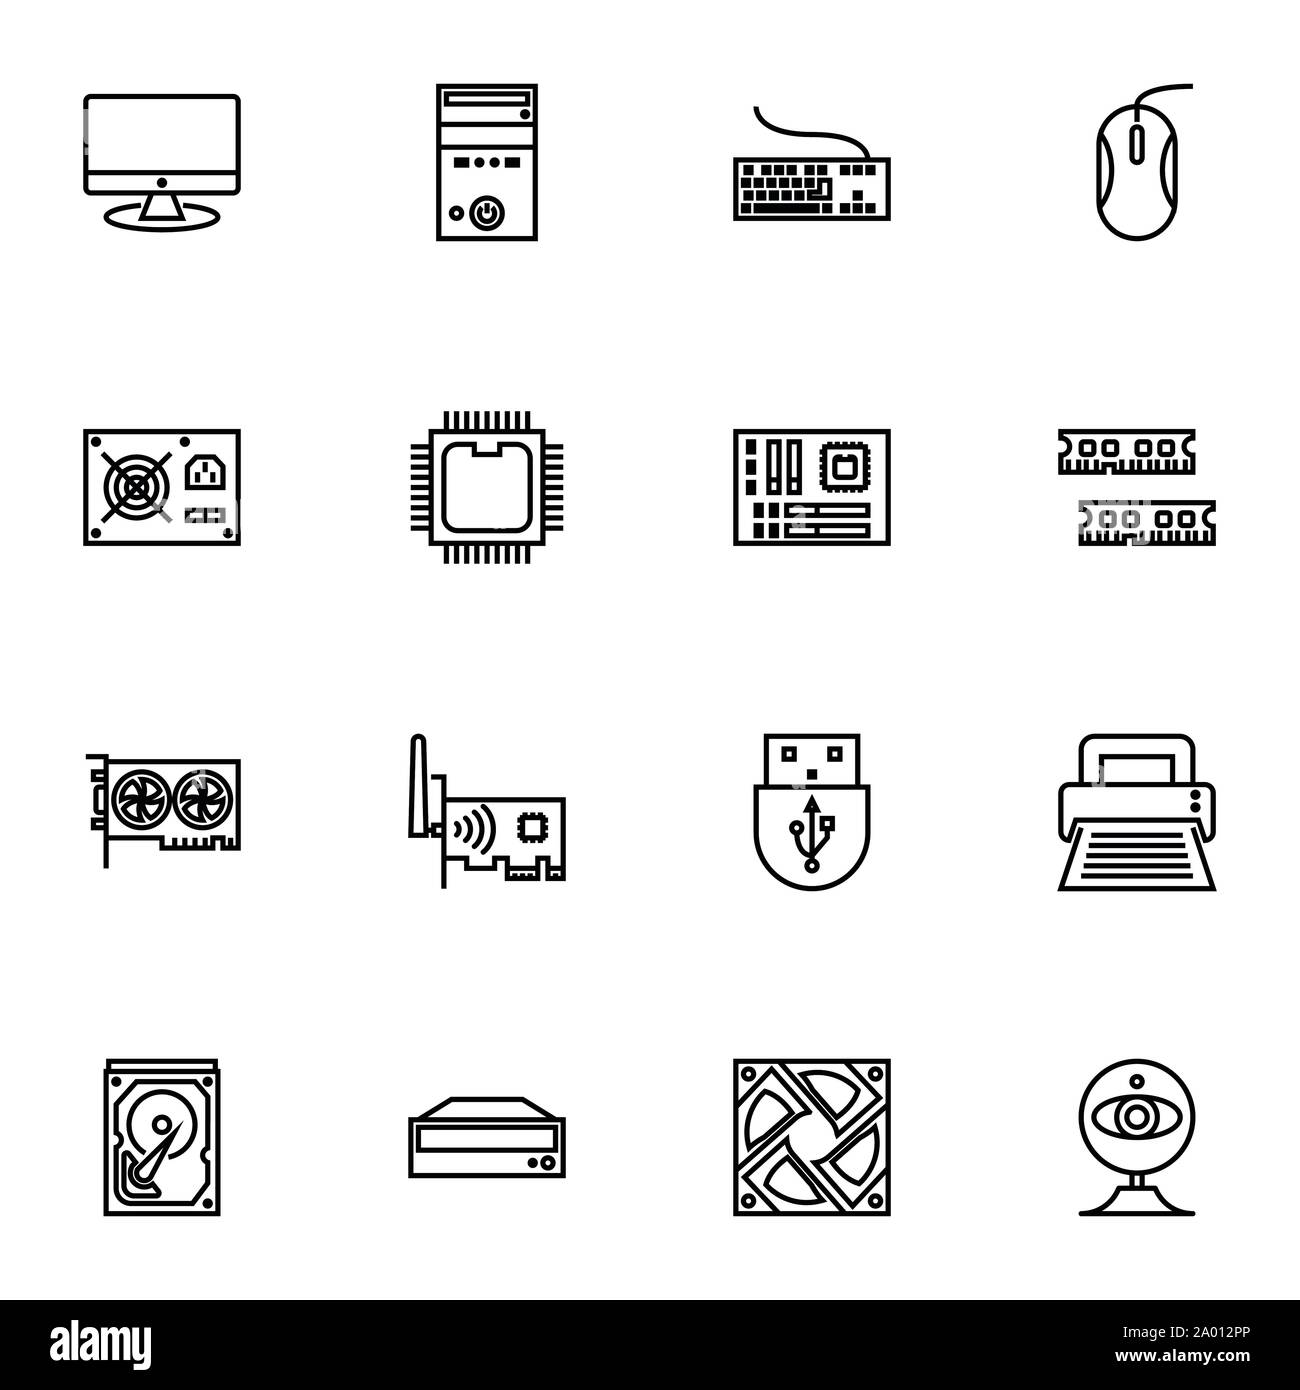 computer hardware and accessories icons set outline or line style vector illustration. computer peripherals Stock Vector